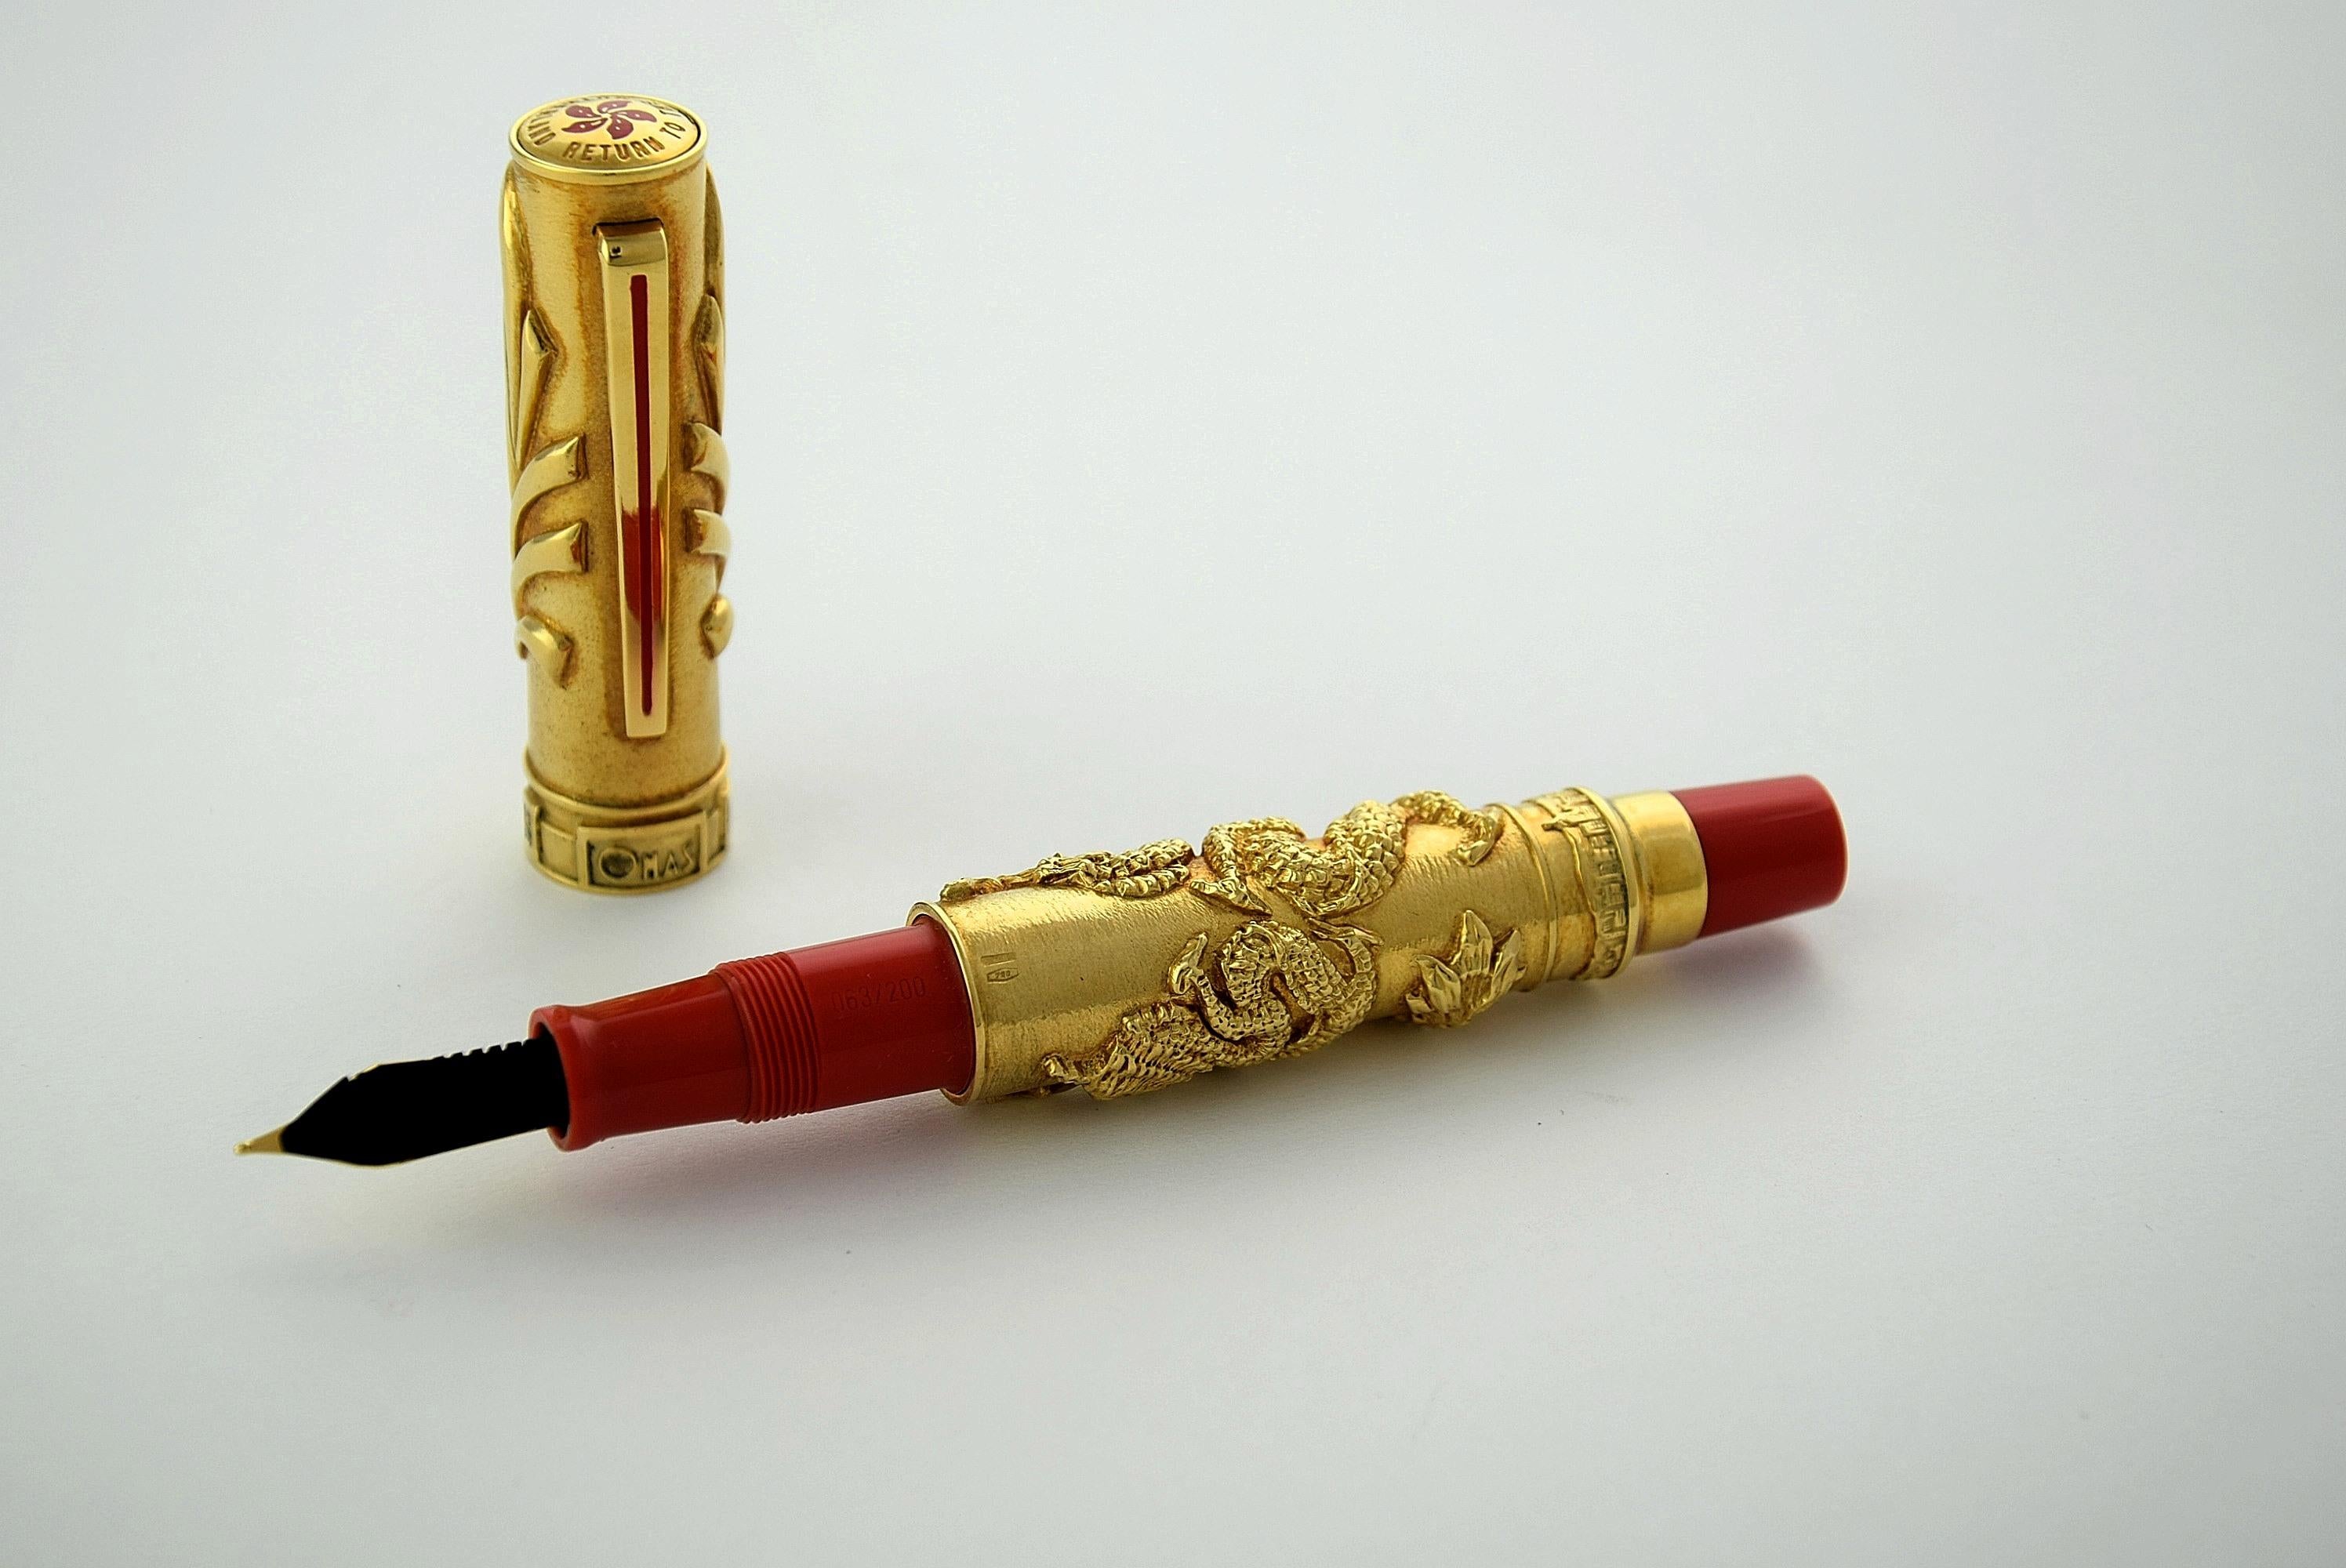 Omas 1997 18-Karat Gold Return to the Motherland Limited Edition Fountain Pen For Sale 1